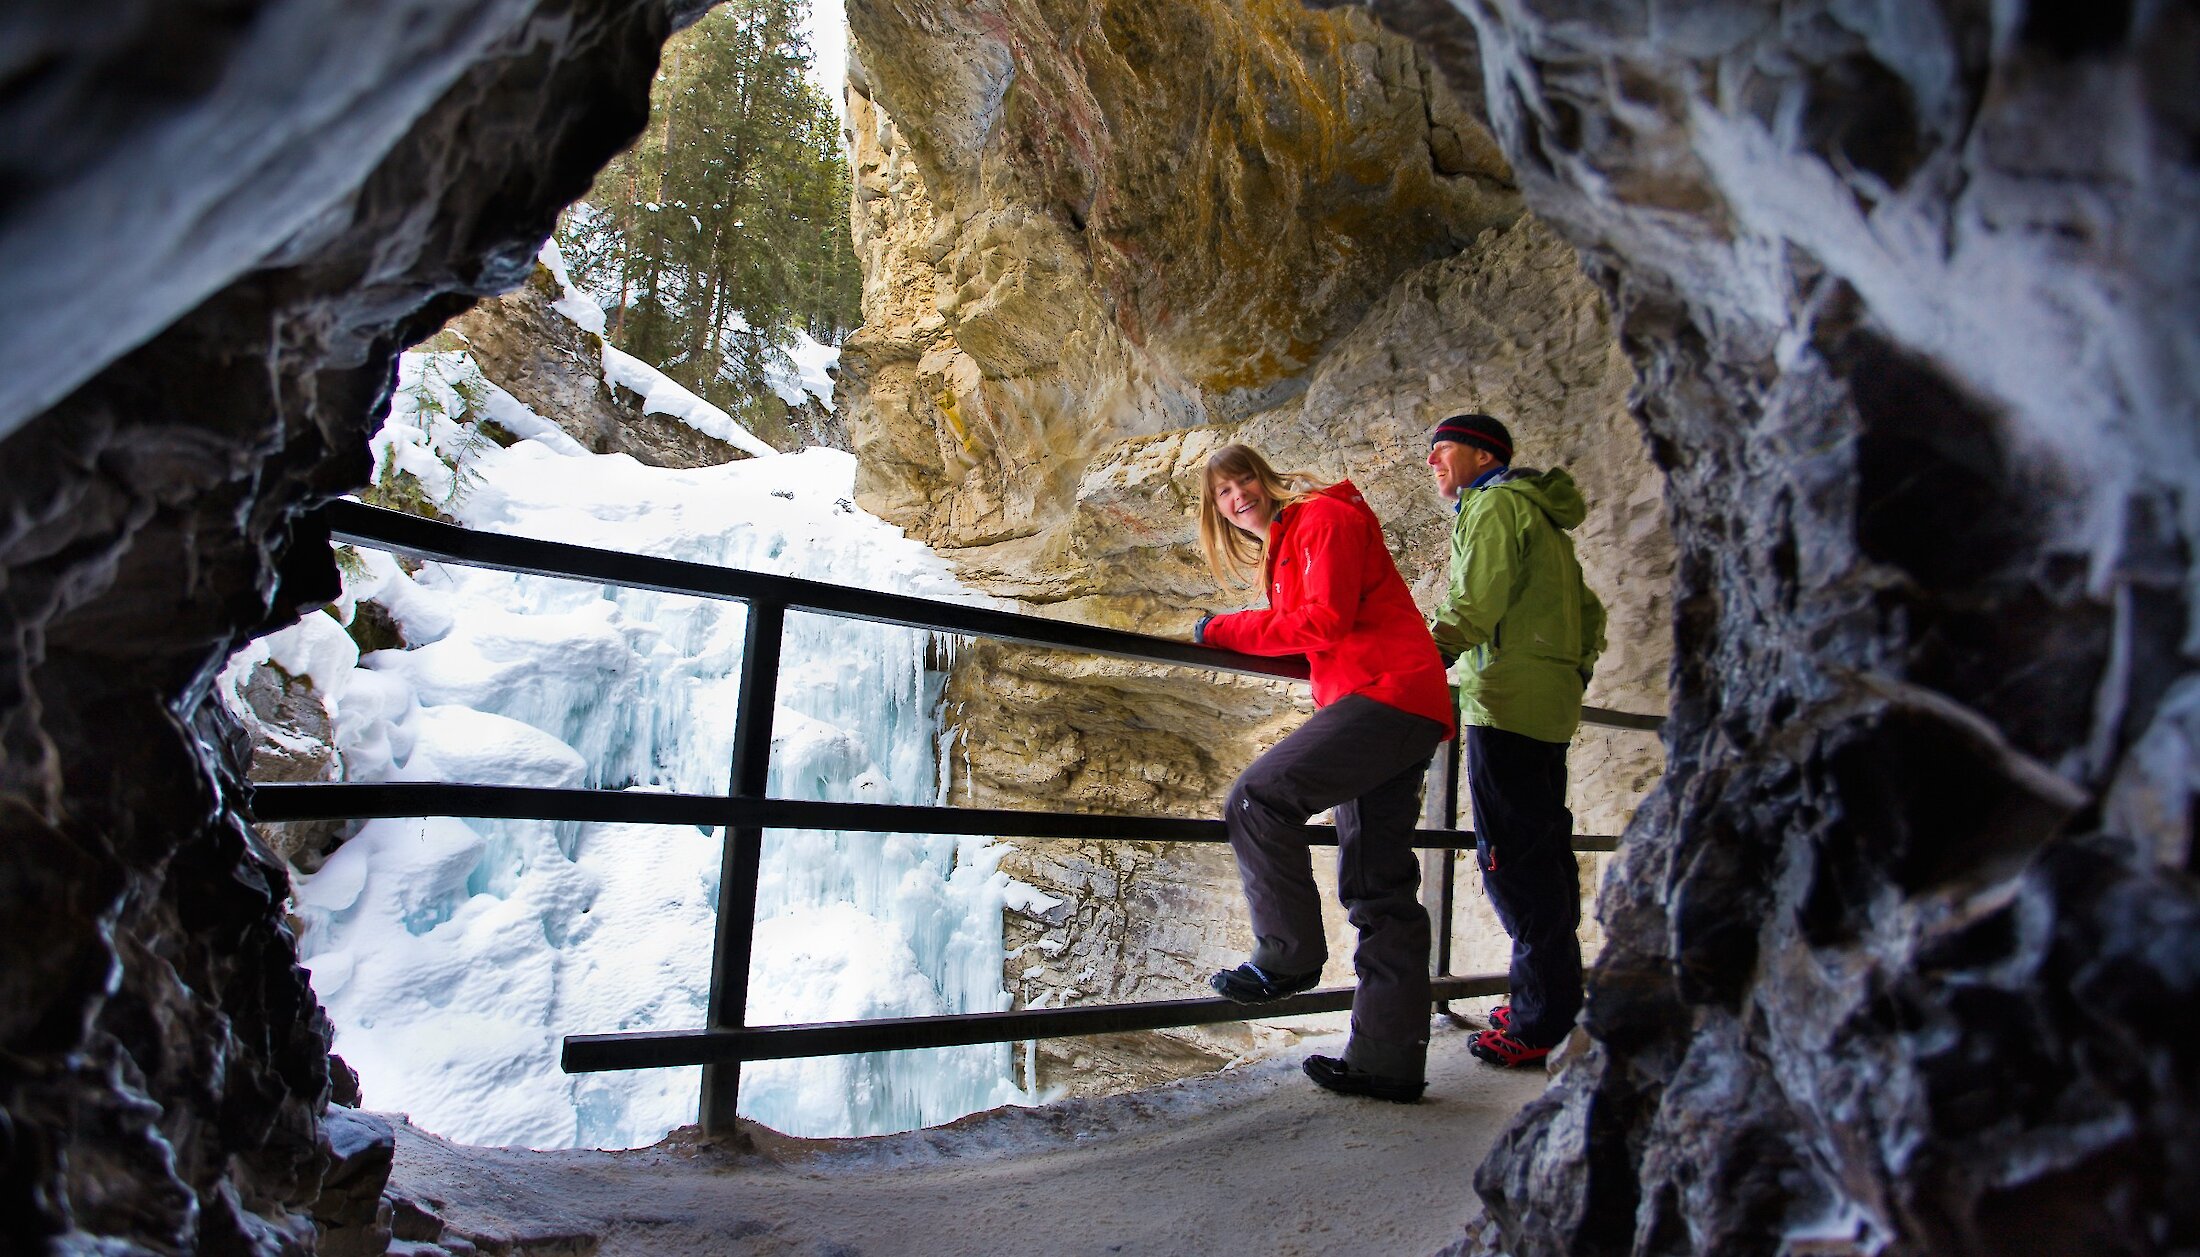 checking out the views of the lower falls in Johnston Canyon